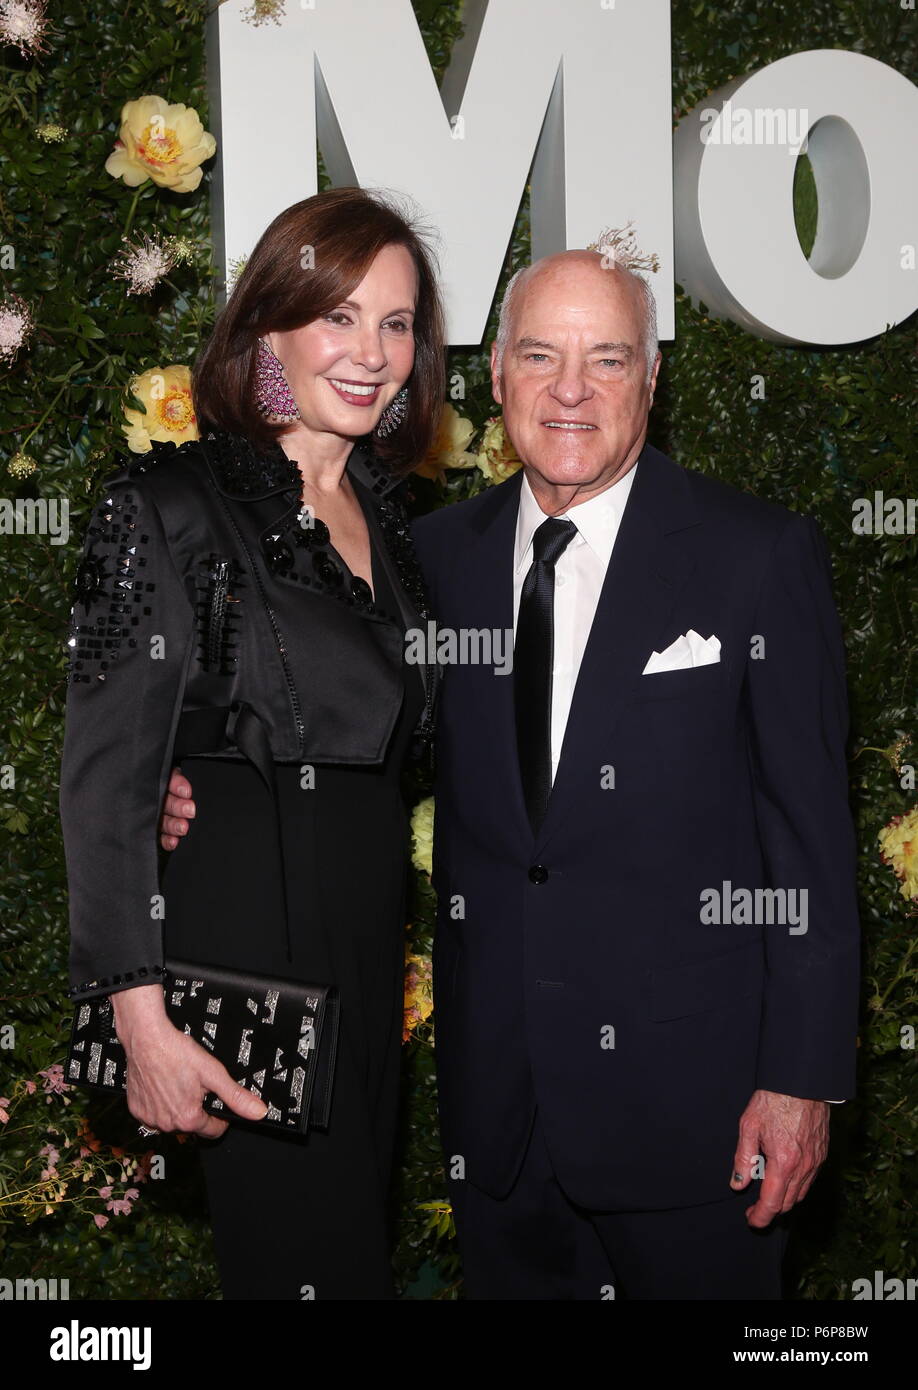 MOMA's Party in the Garden 2018 at The Museum of Modern Art  Featuring: Marie-Josee Kravis, Henry Kravis Where: New York, New York, United States When: 31 May 2018 Credit: Derrick Salters/WENN.com Stock Photo